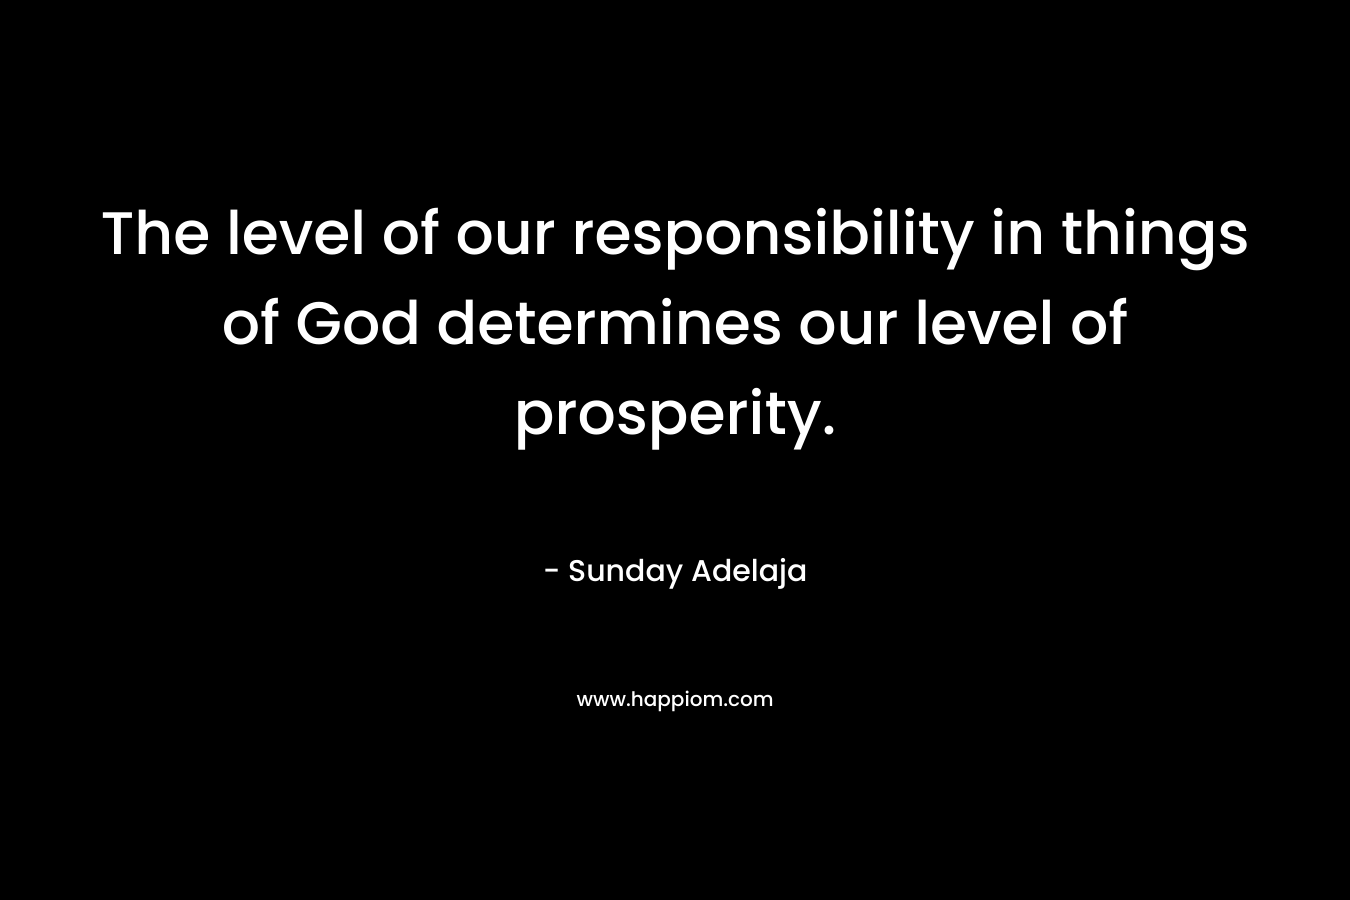 The level of our responsibility in things of God determines our level of prosperity.